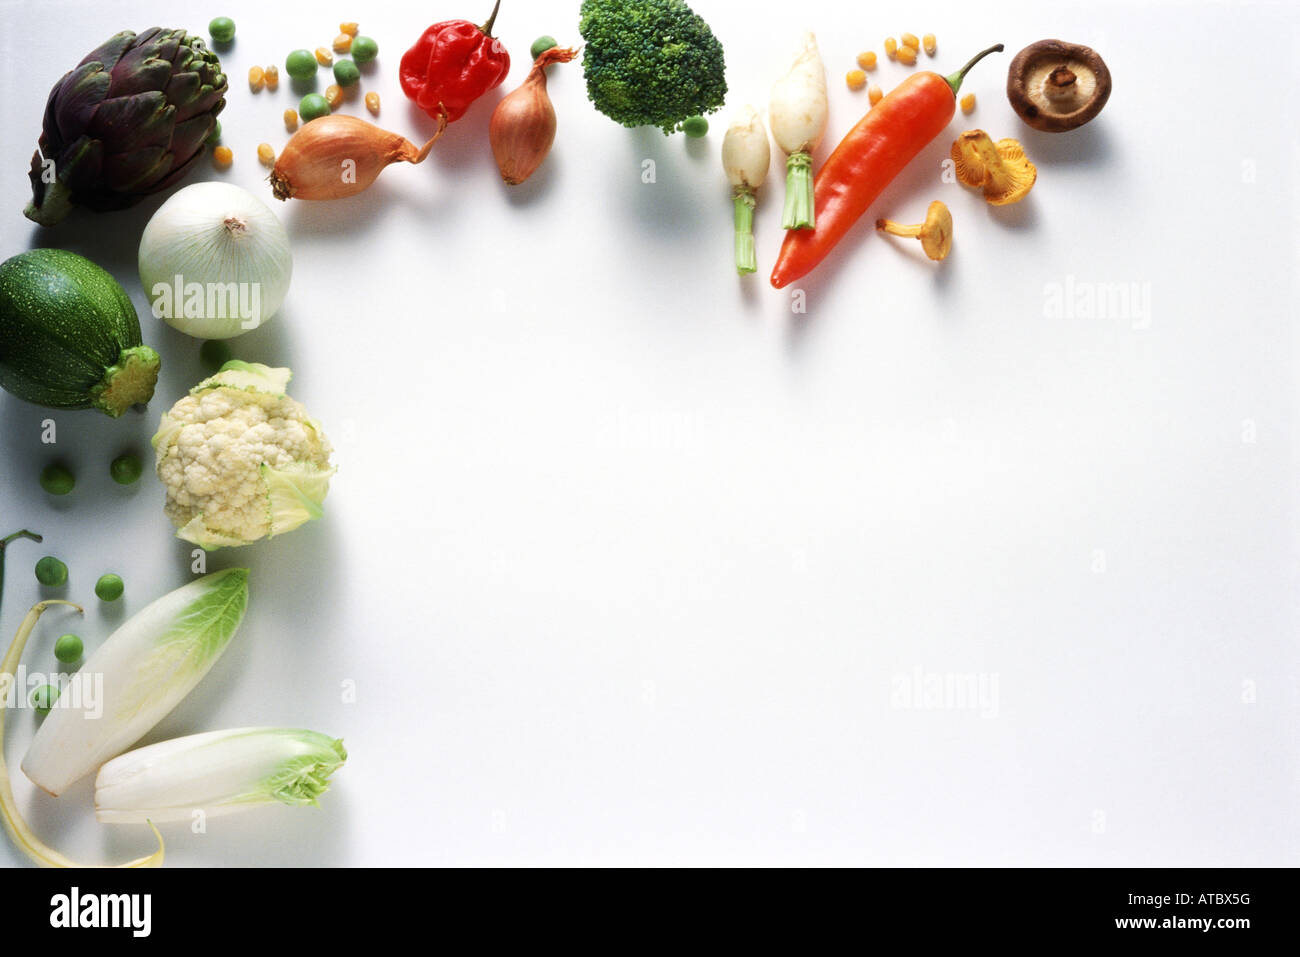 Assortment of vegetables, viewed from directly above Stock Photo